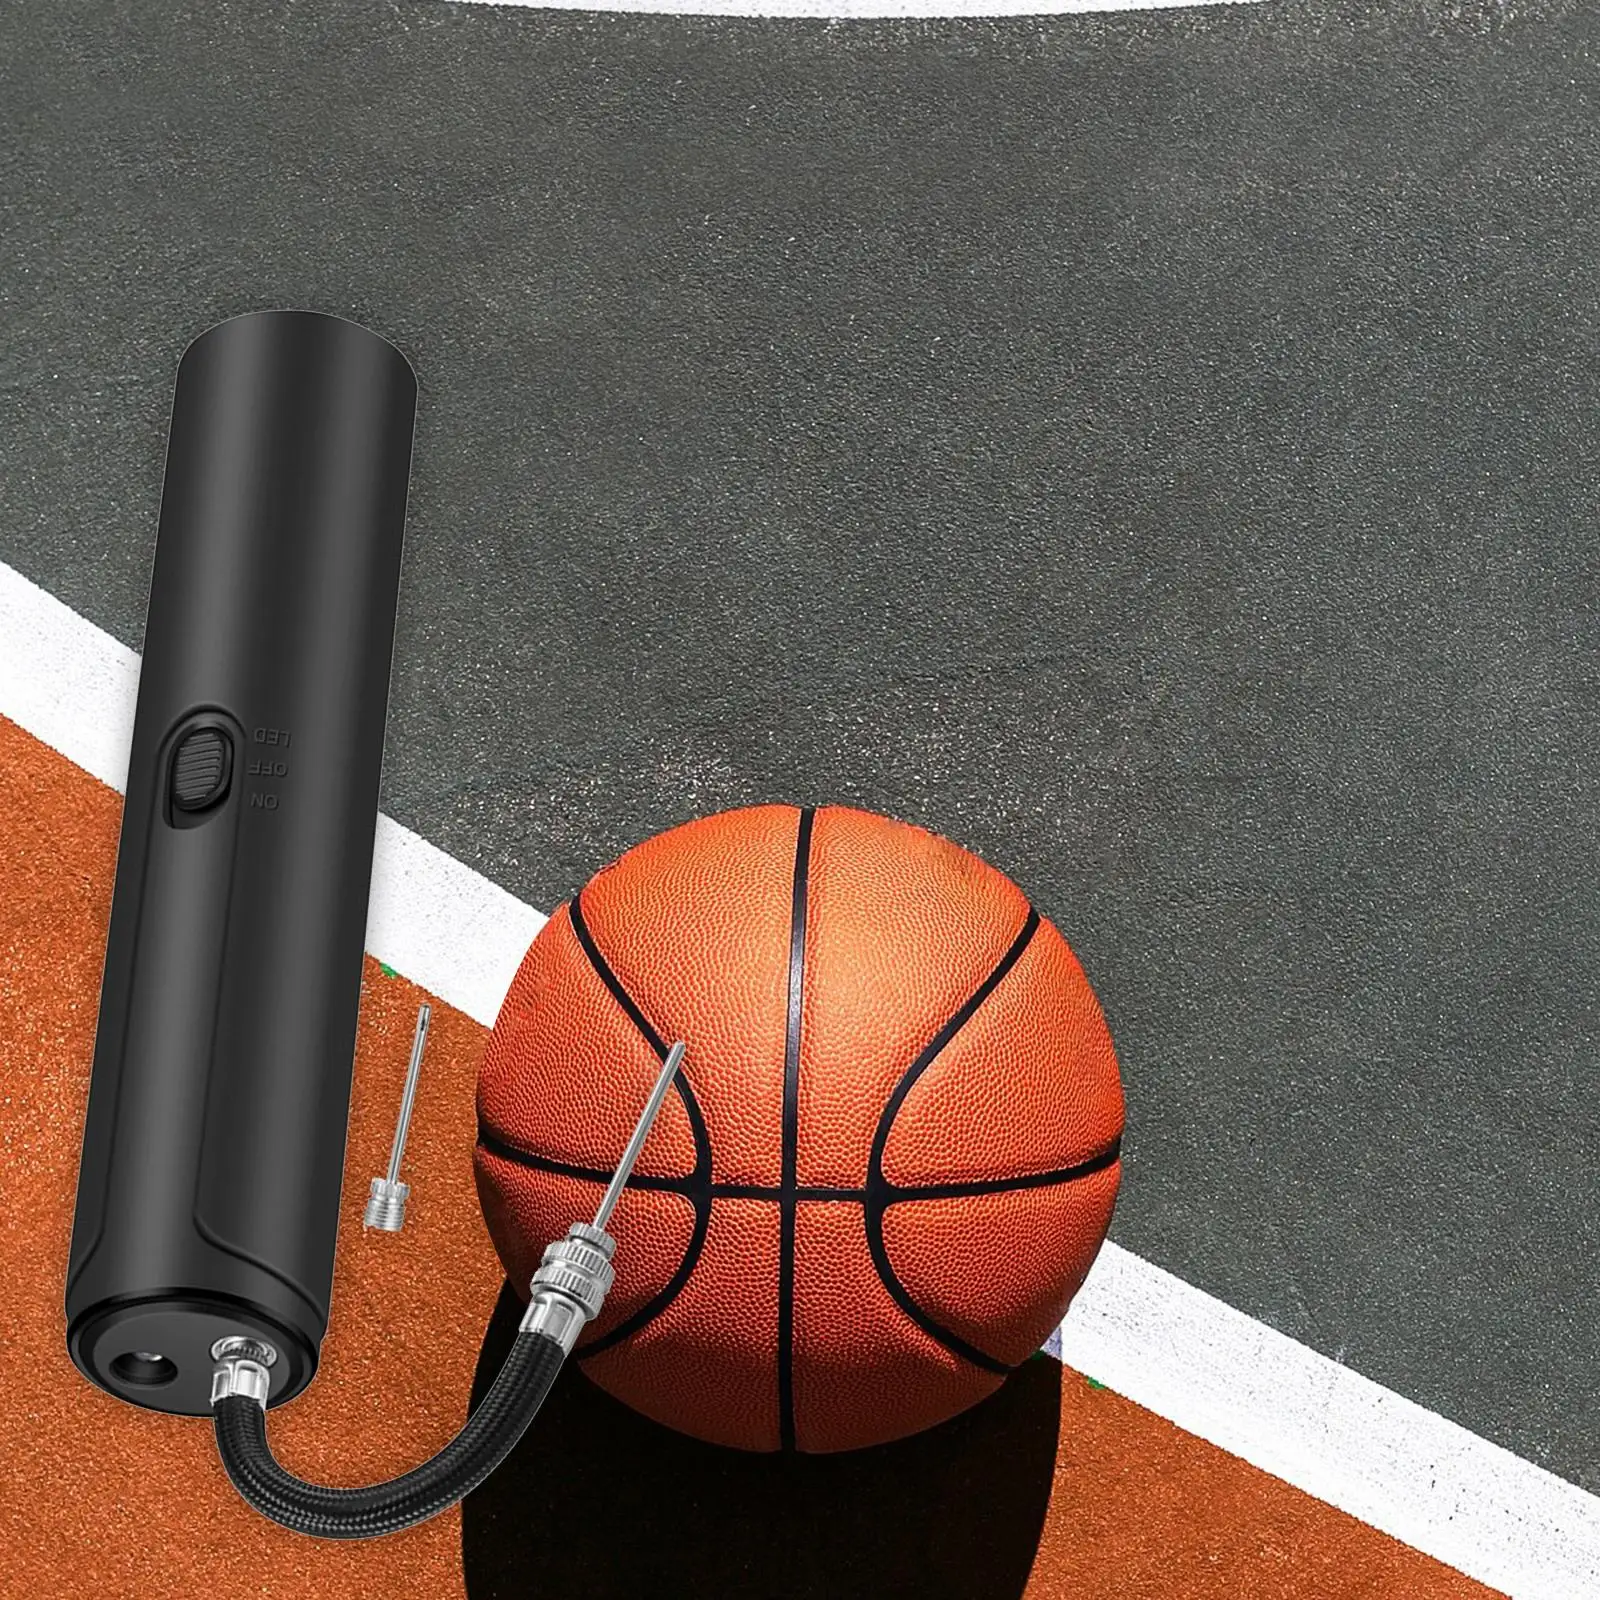 Electric Ball Pump Lightweight Reusable Practicle Wide Application Air Pump for Sports Balls Soccer Football Swimming Ring Bike